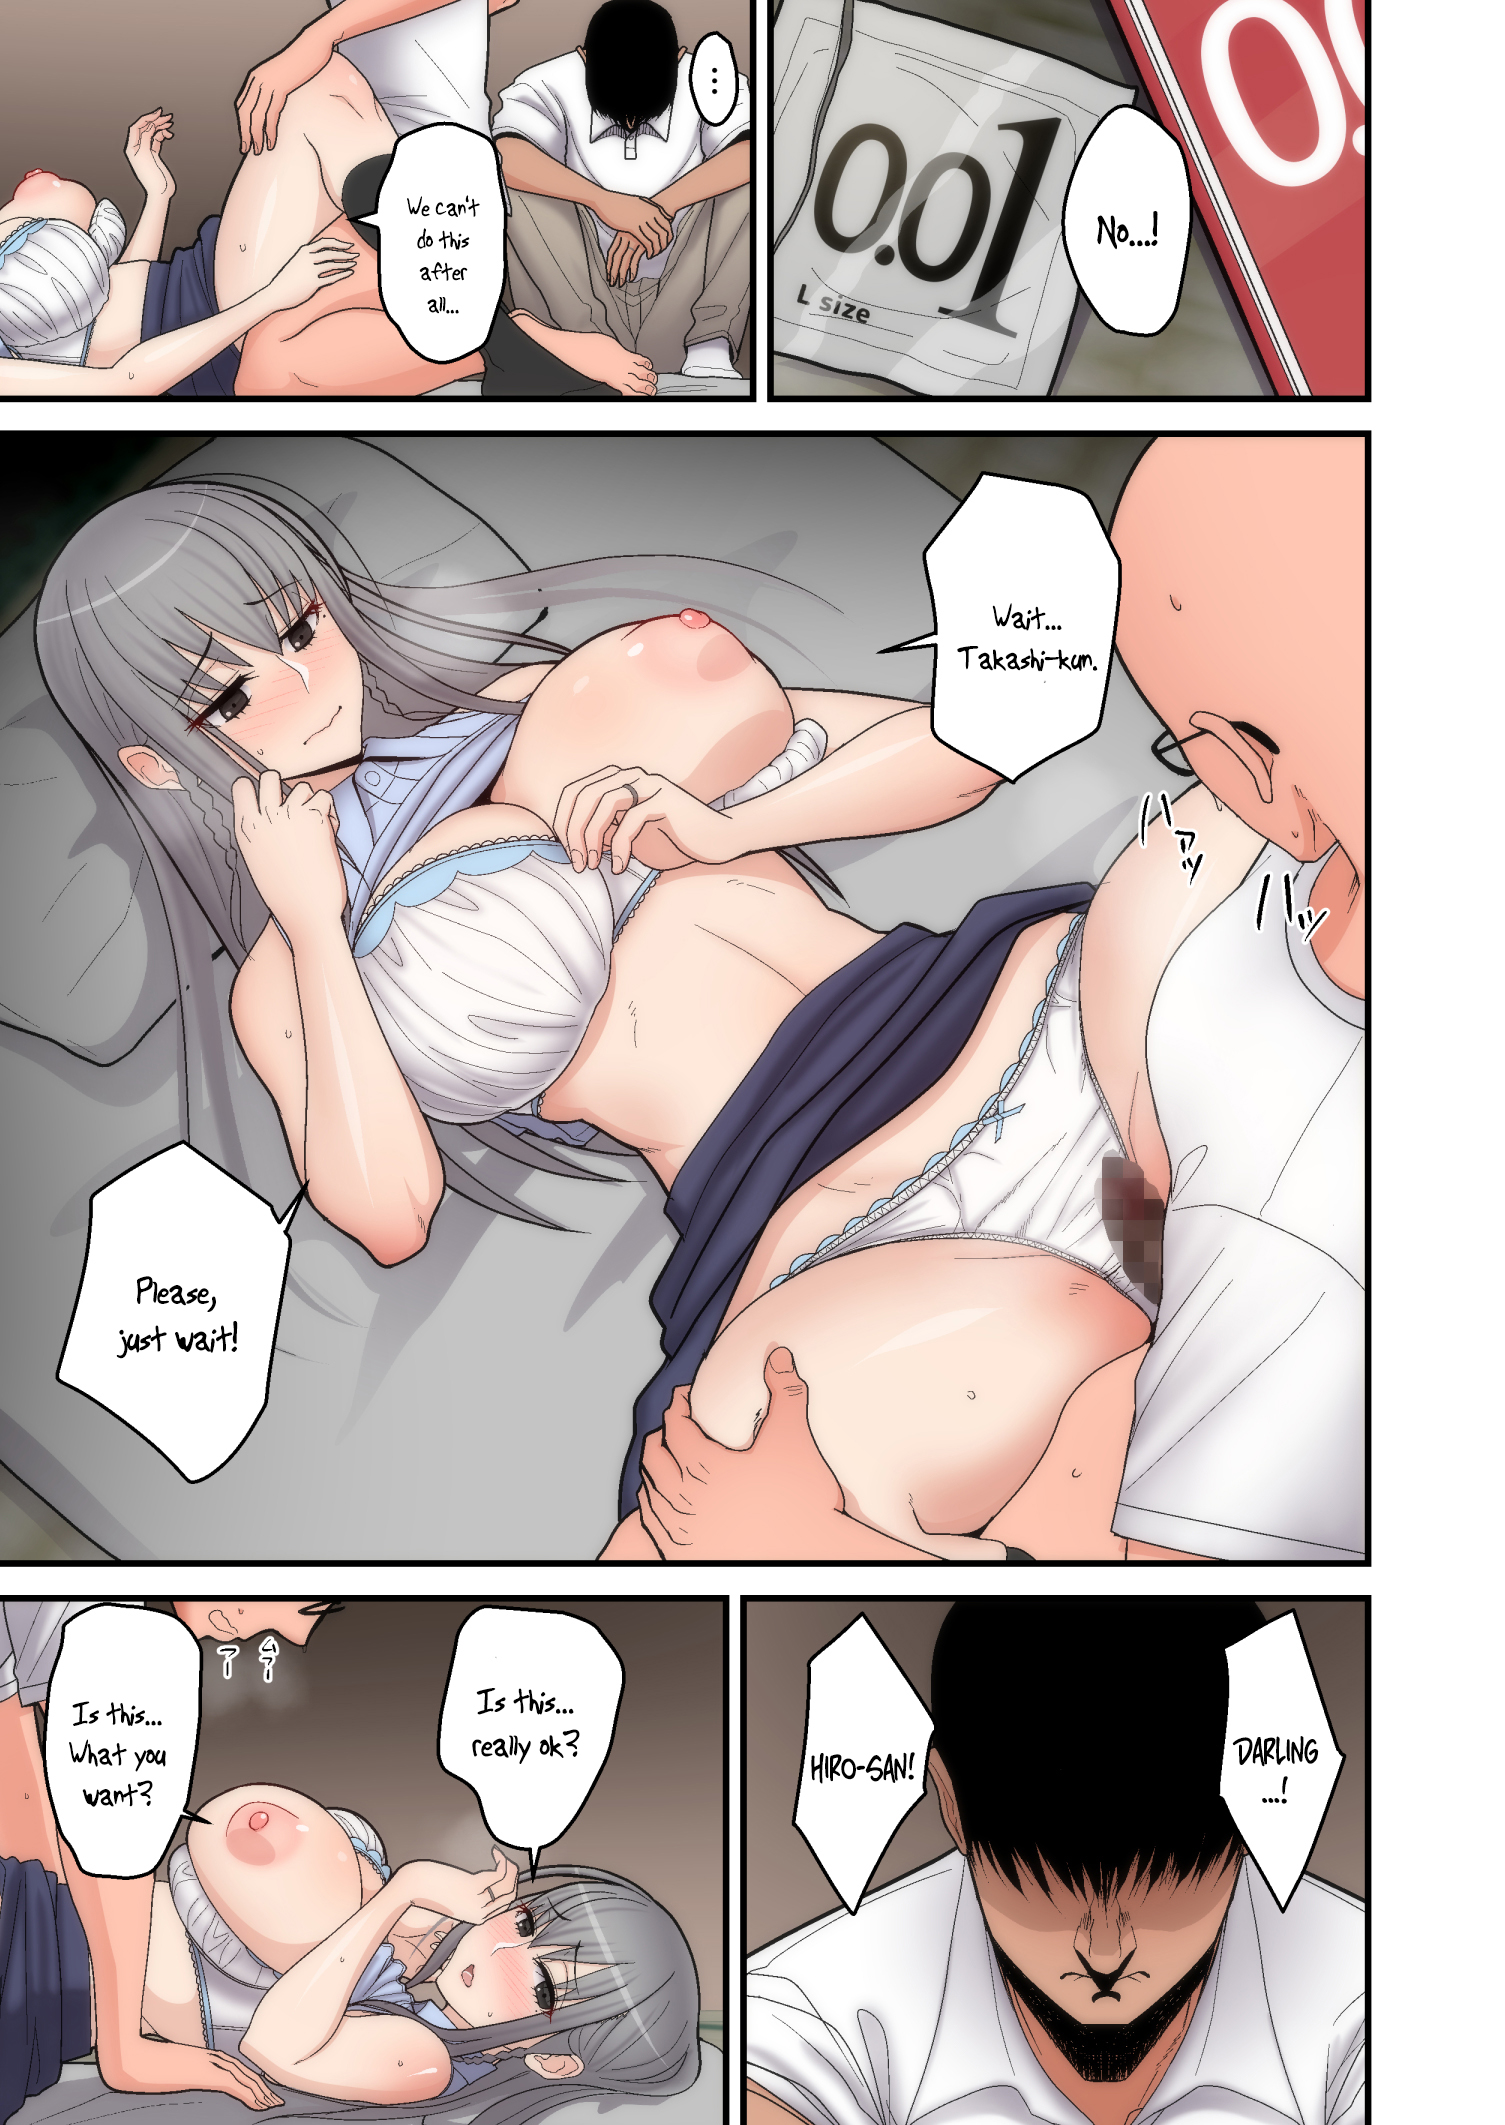 Husband must watch cheating wife fuck or she'll die - hentai comics - 49  Pics | Hentai City